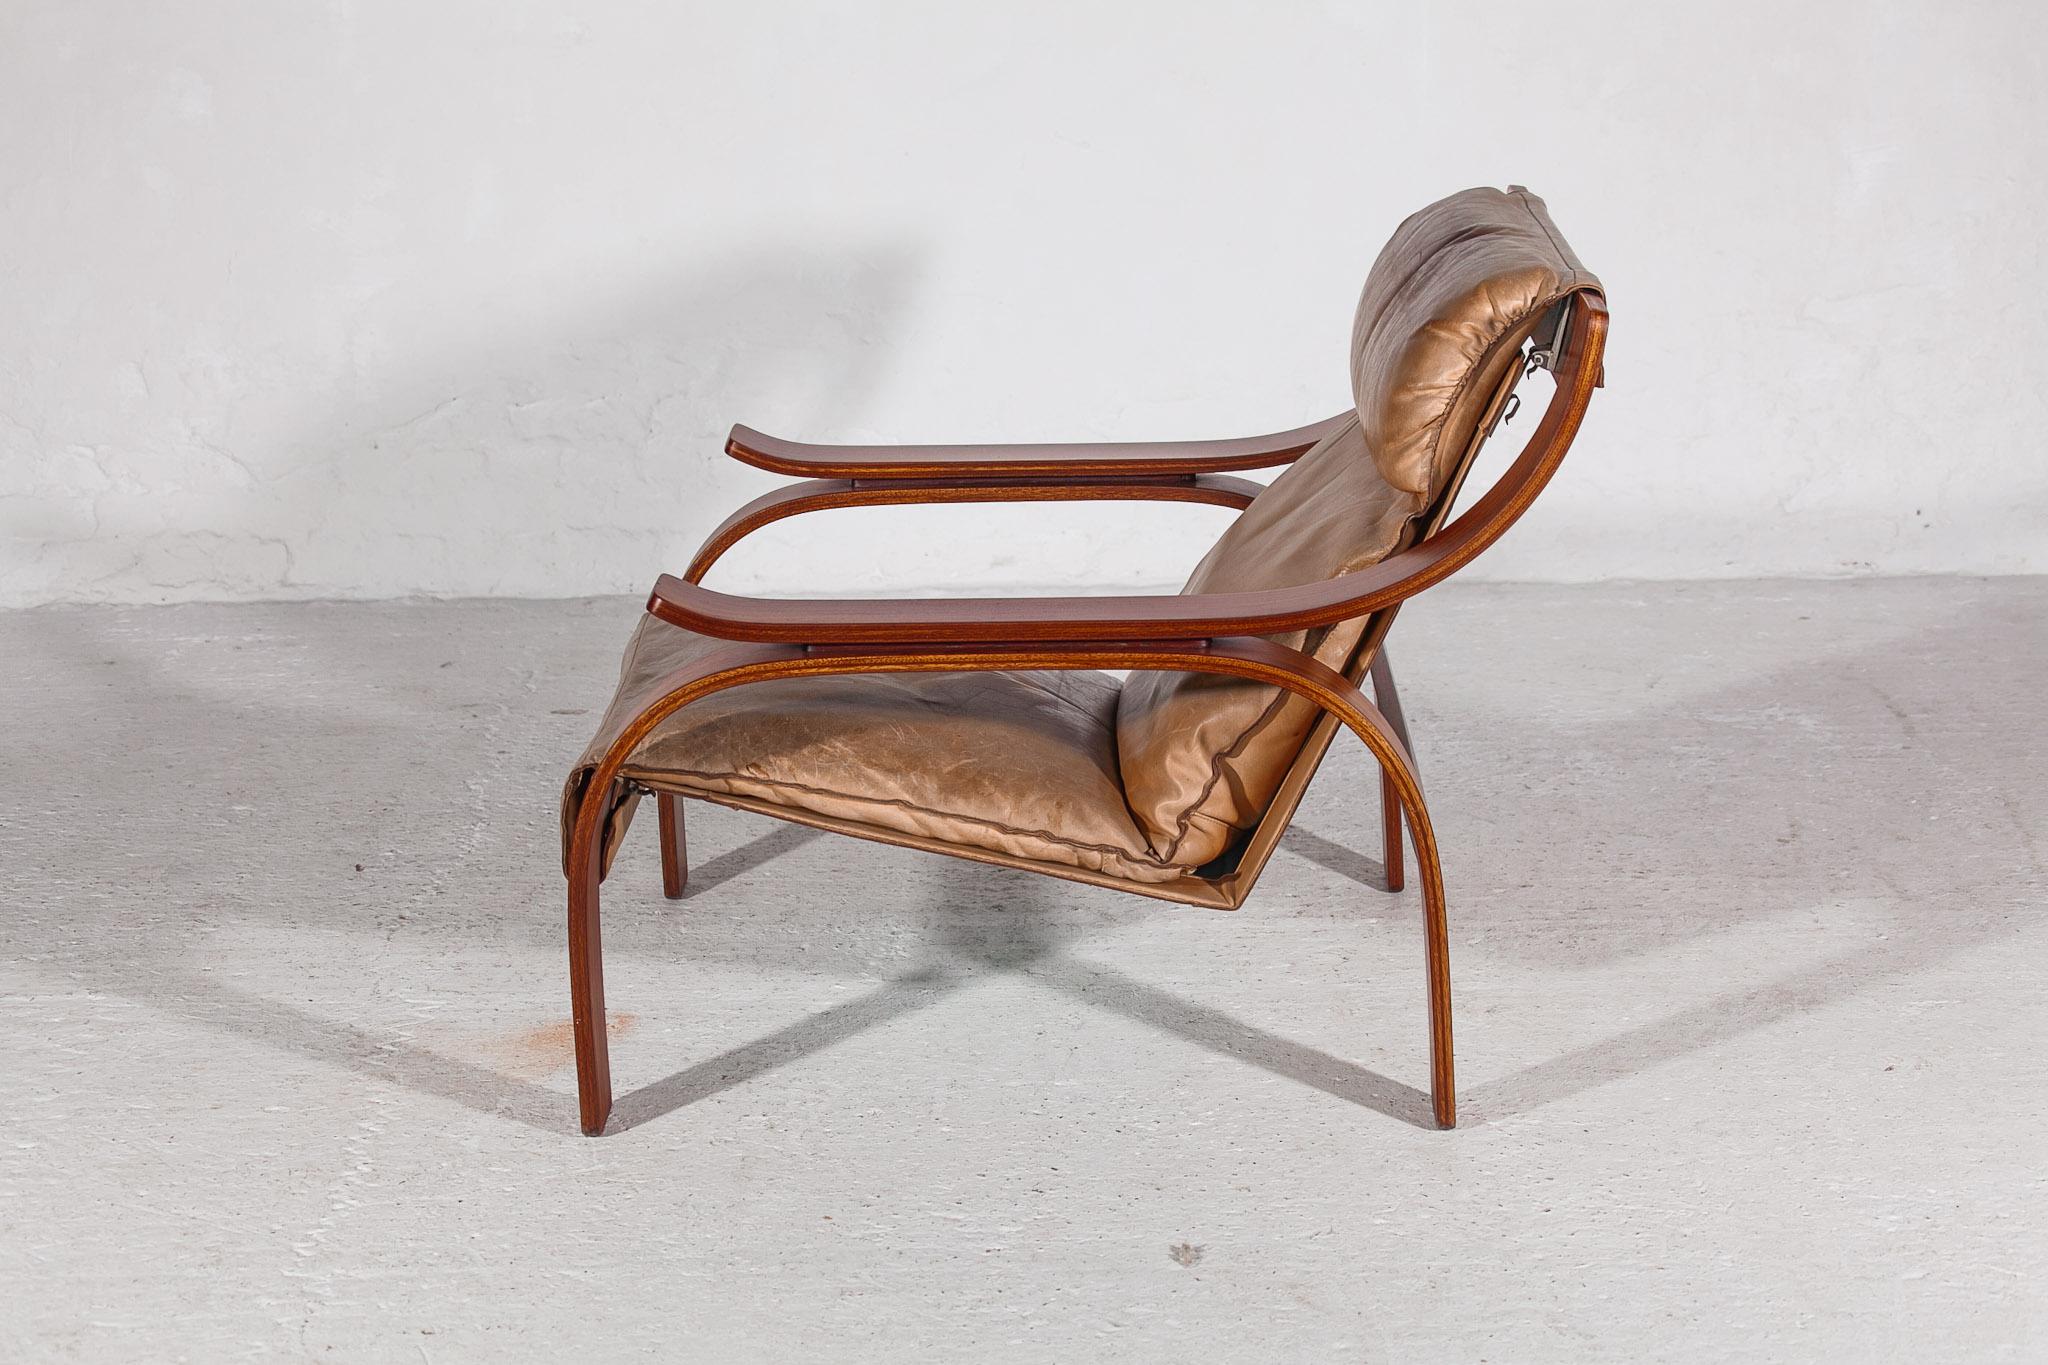 Italian Set of Two Lounge Chairs designed by Marco Zanuso, 1962 Italy, Model 